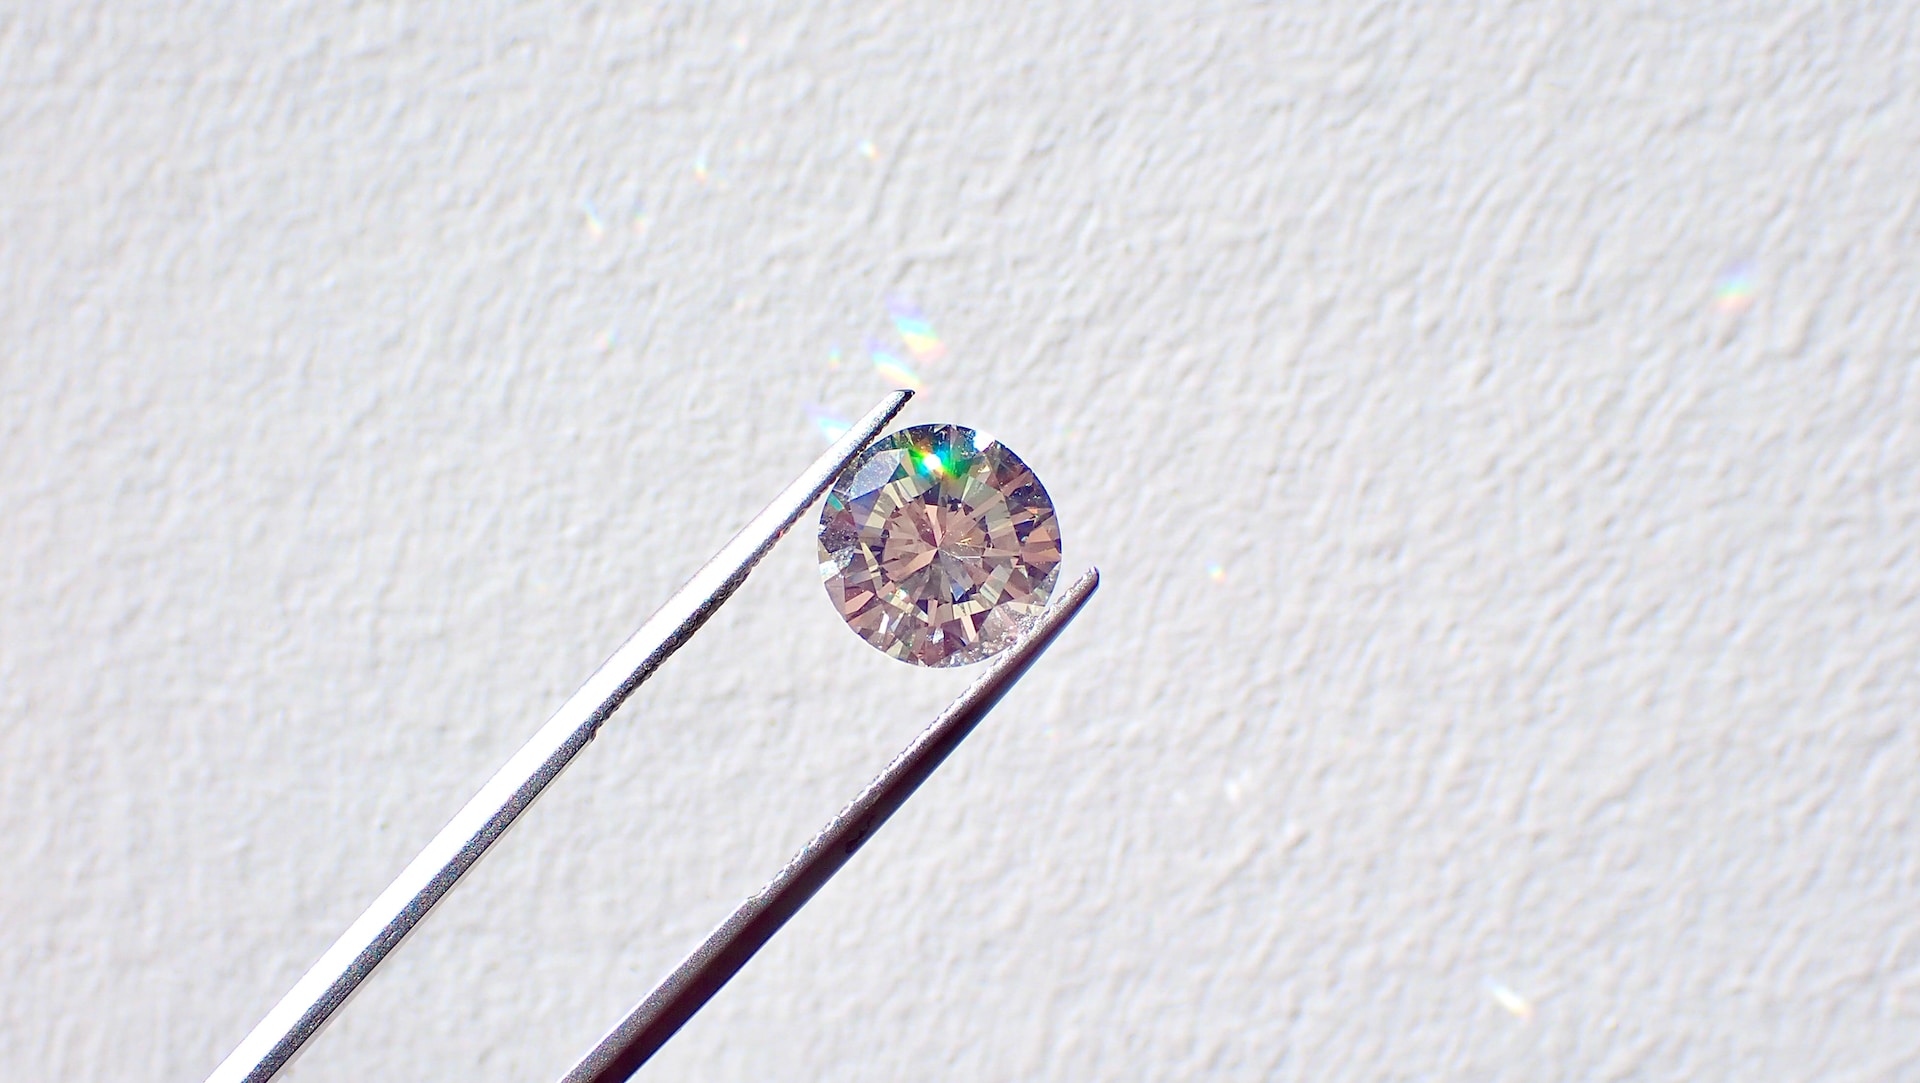 a round cut diamond held between tweezers against a white surface